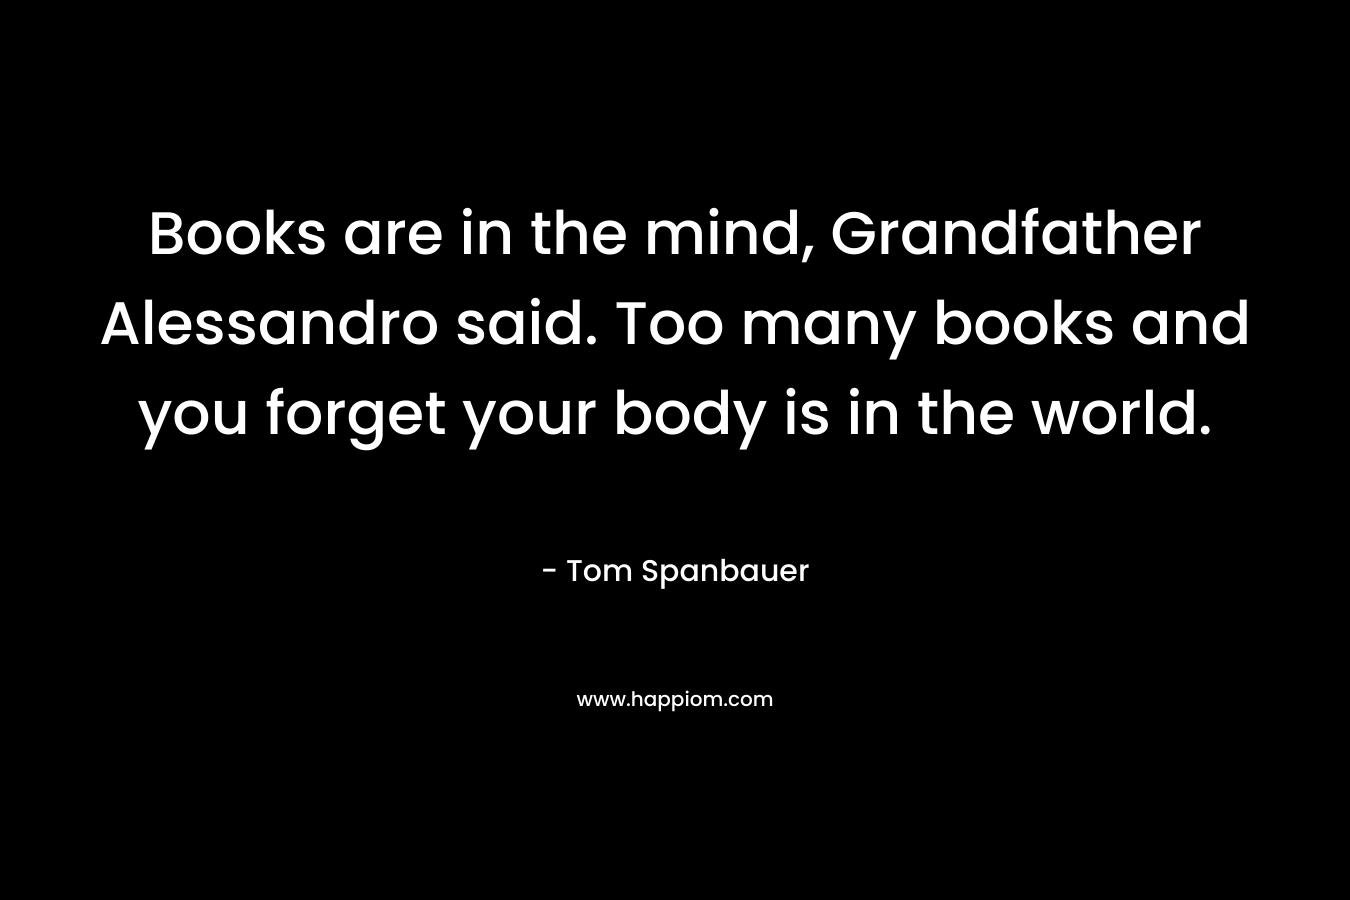 Books are in the mind, Grandfather Alessandro said. Too many books and you forget your body is in the world. – Tom Spanbauer